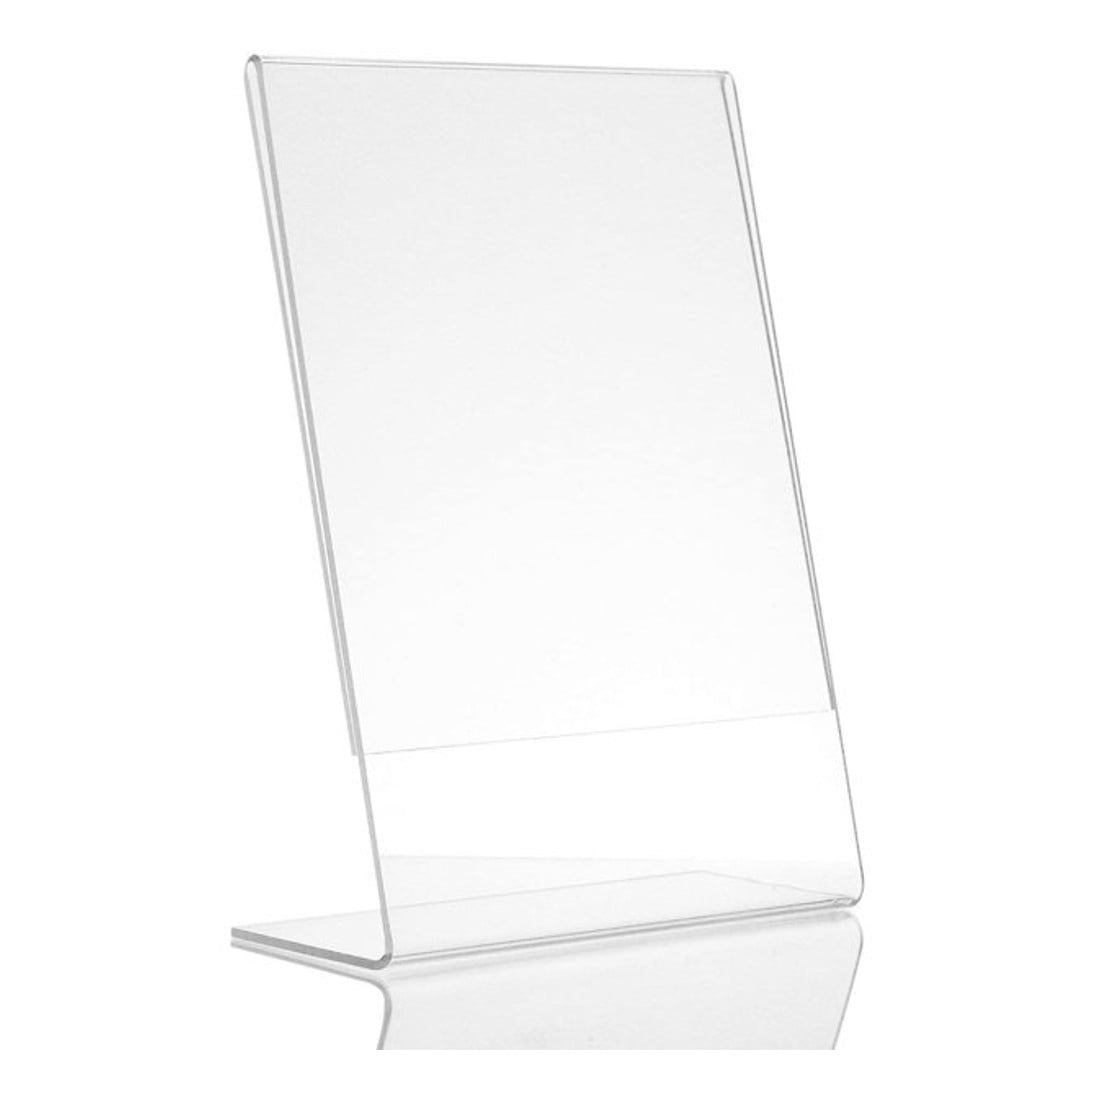 Advertisement Frame Table Info Sign Holder 8.5”W x 14”H Slanted Acrylic Qty 12 